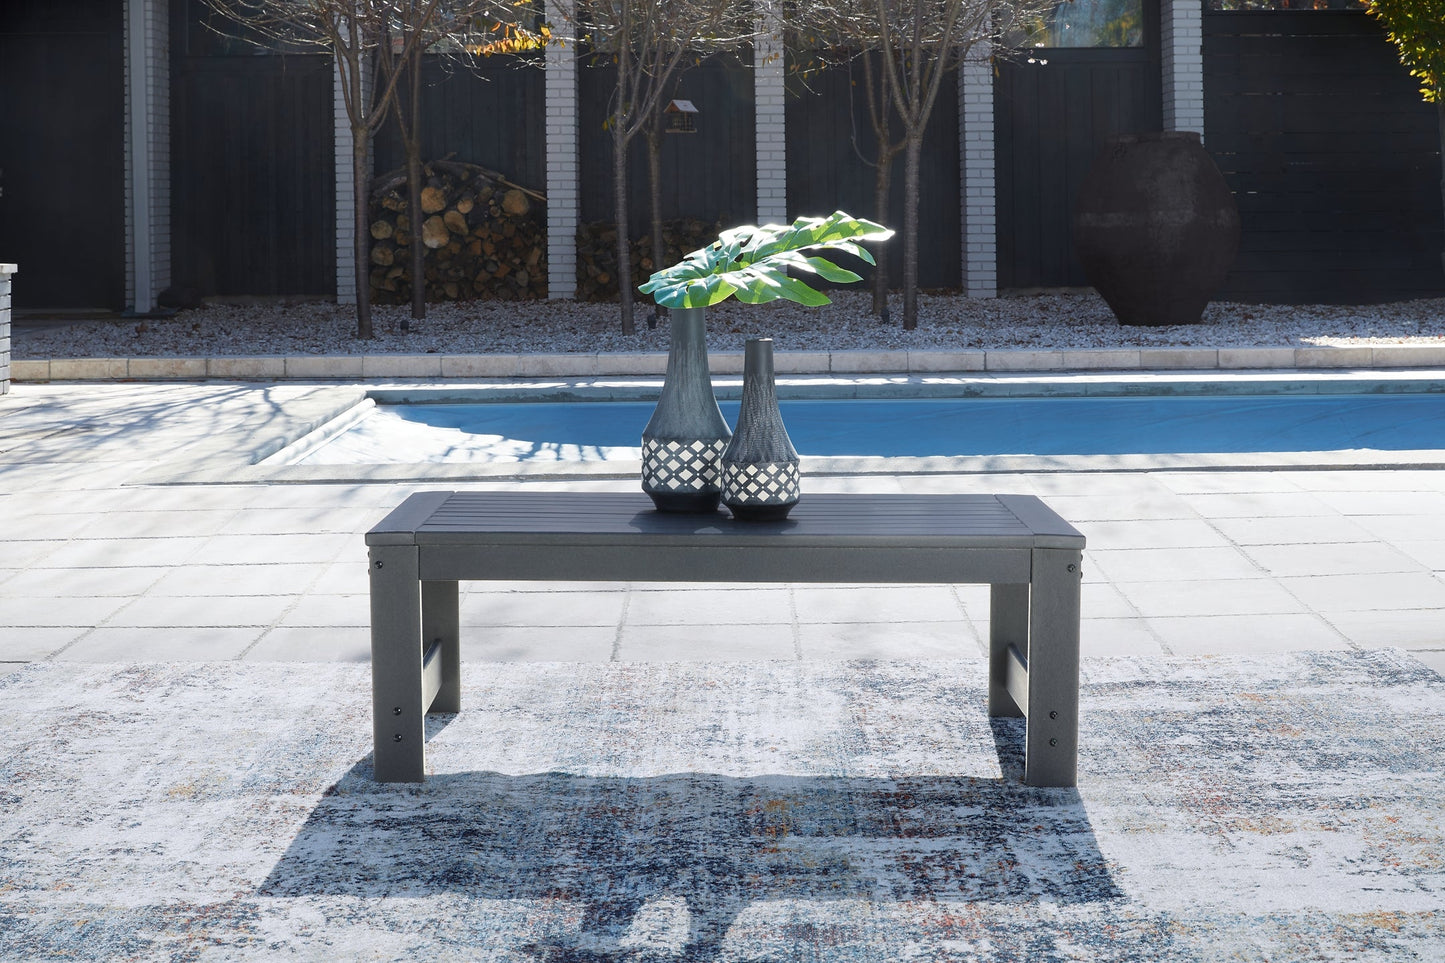 Amora Outdoor Coffee Table with 2 End Tables Smyrna Furniture Outlet